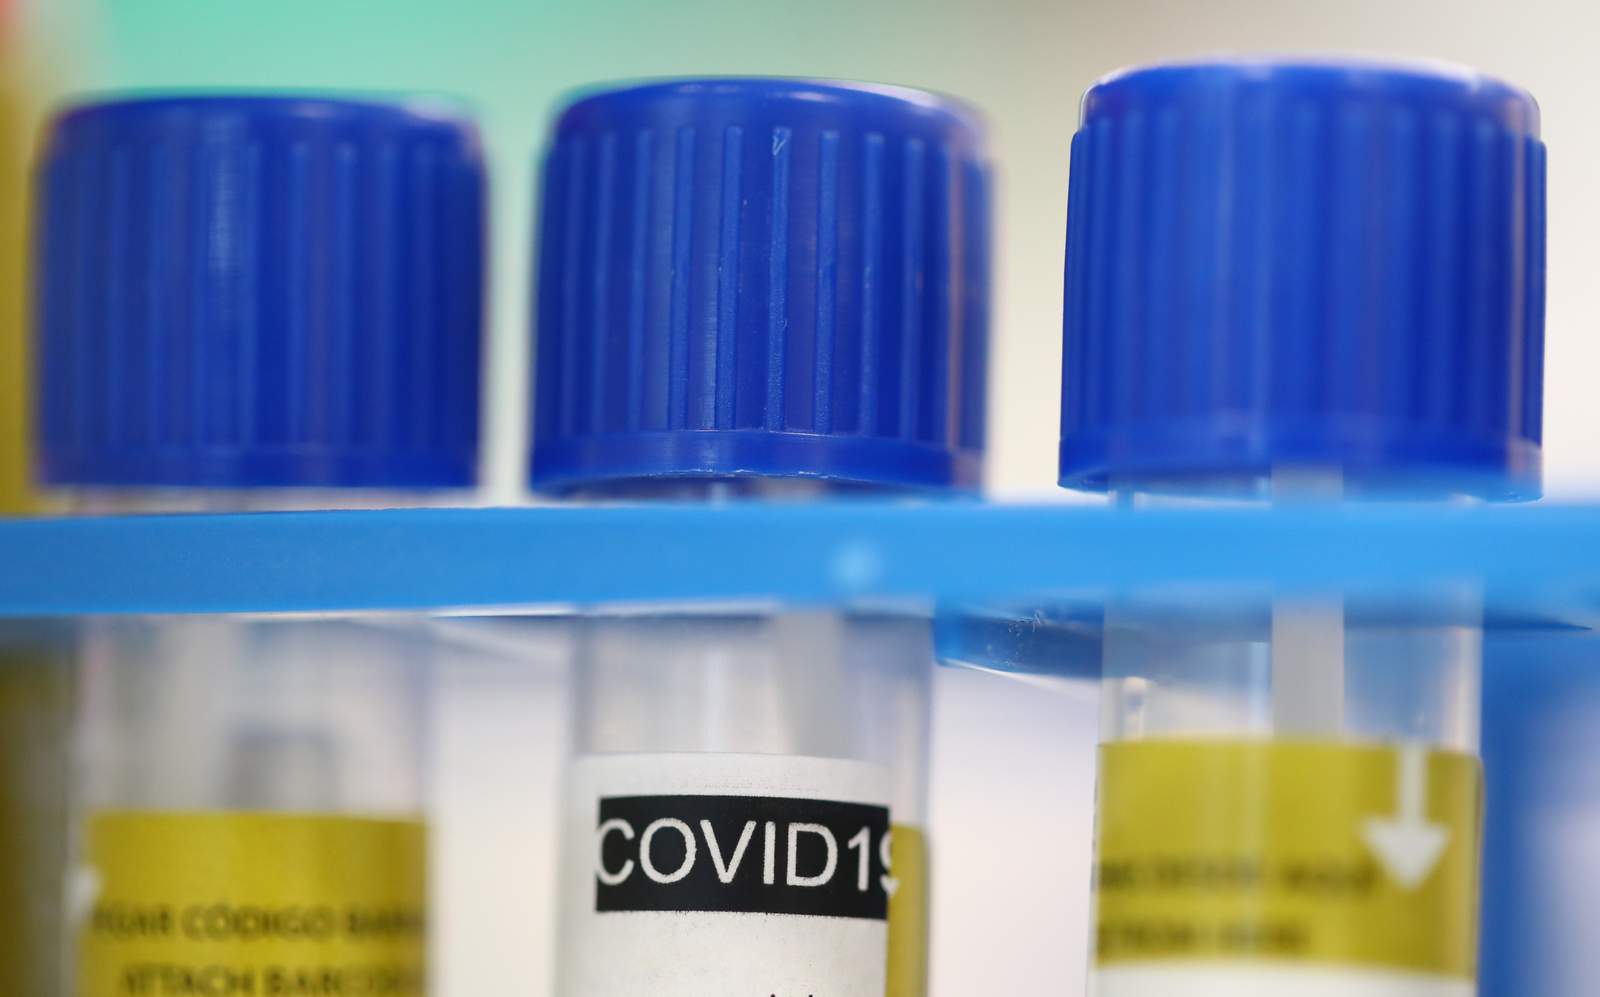 State raises questions about COVID-19 death data. Some question timing of announcement